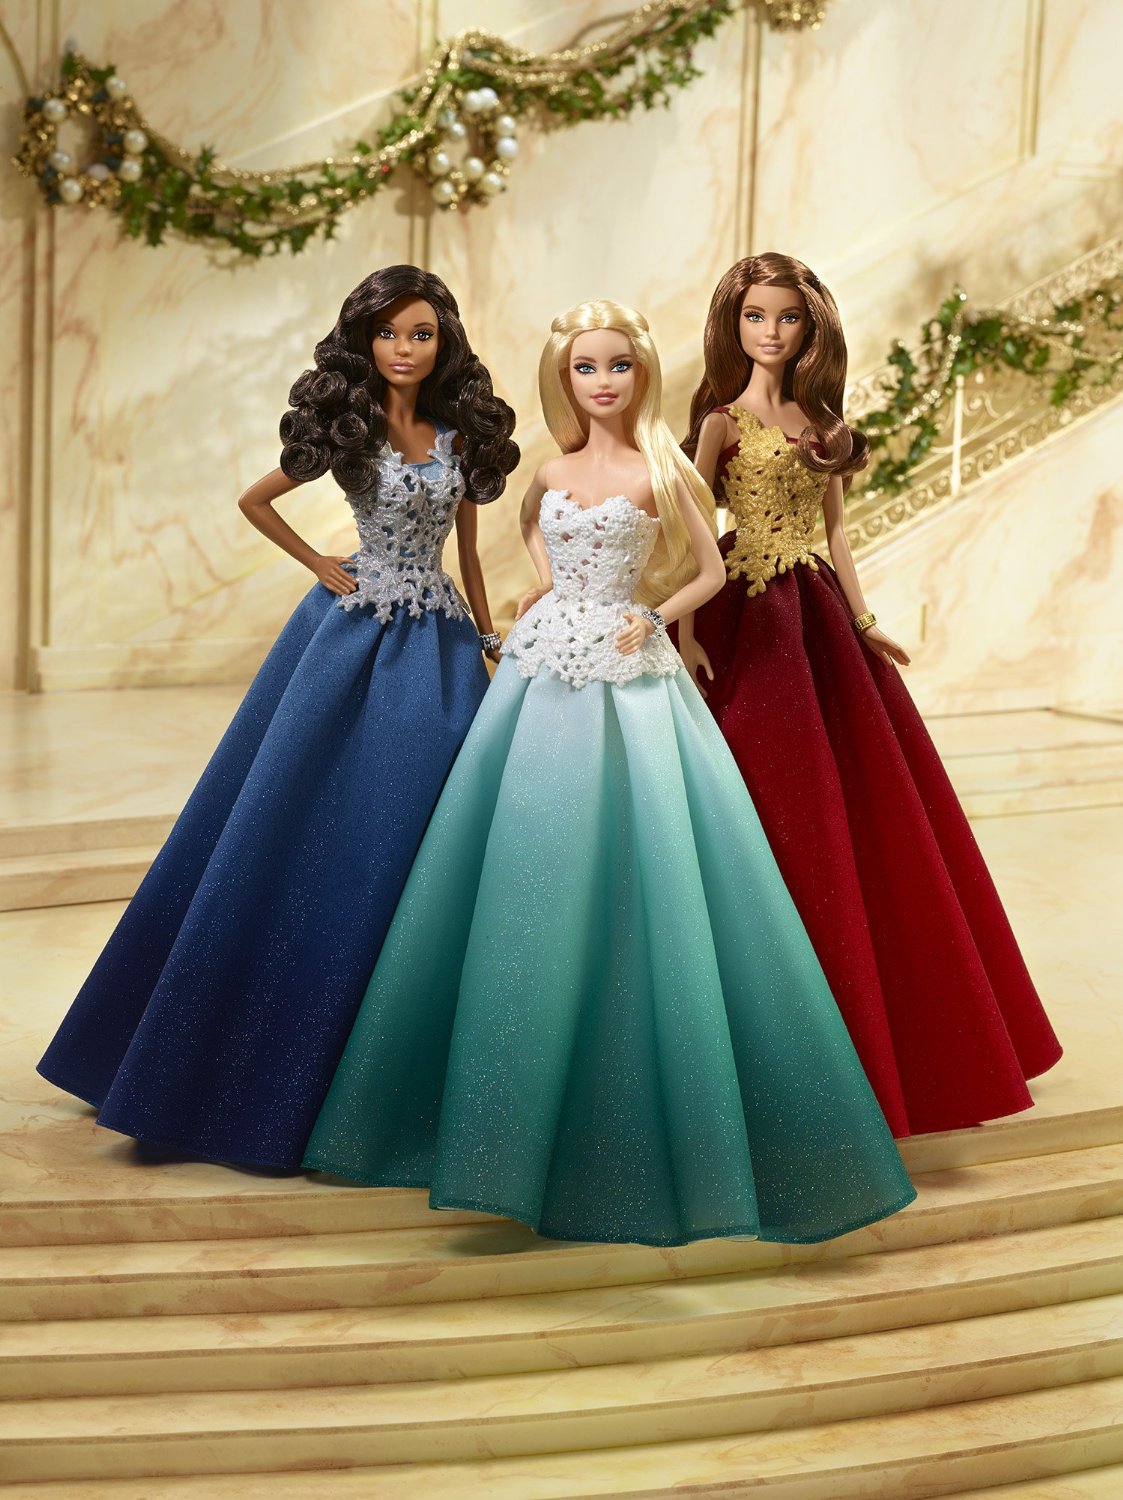 Holiday Barbie Dolls for 2016